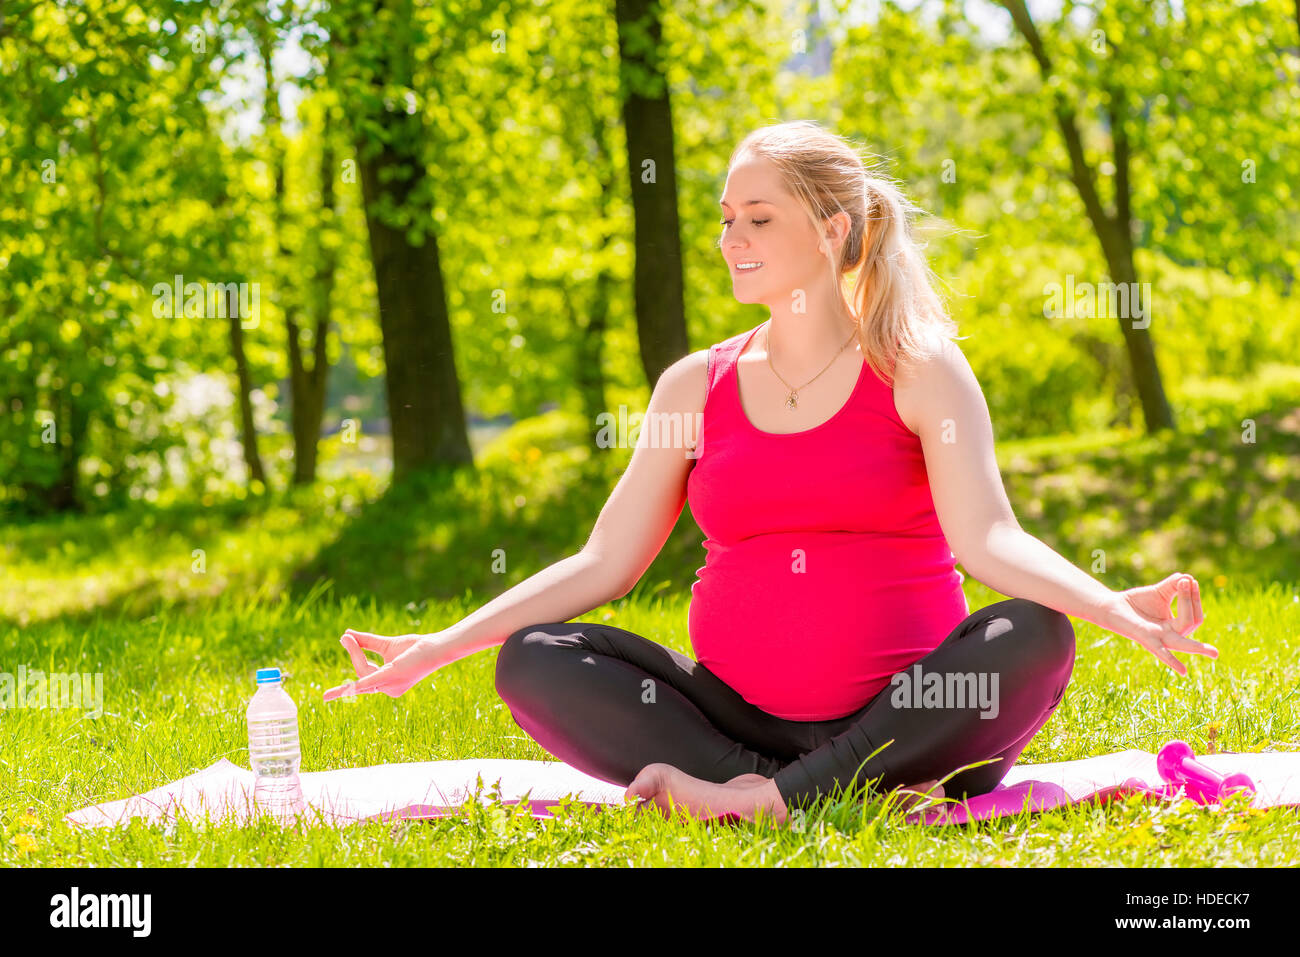 young pregnant woman in a lotus position doing yoga and relaxation Stock Photo